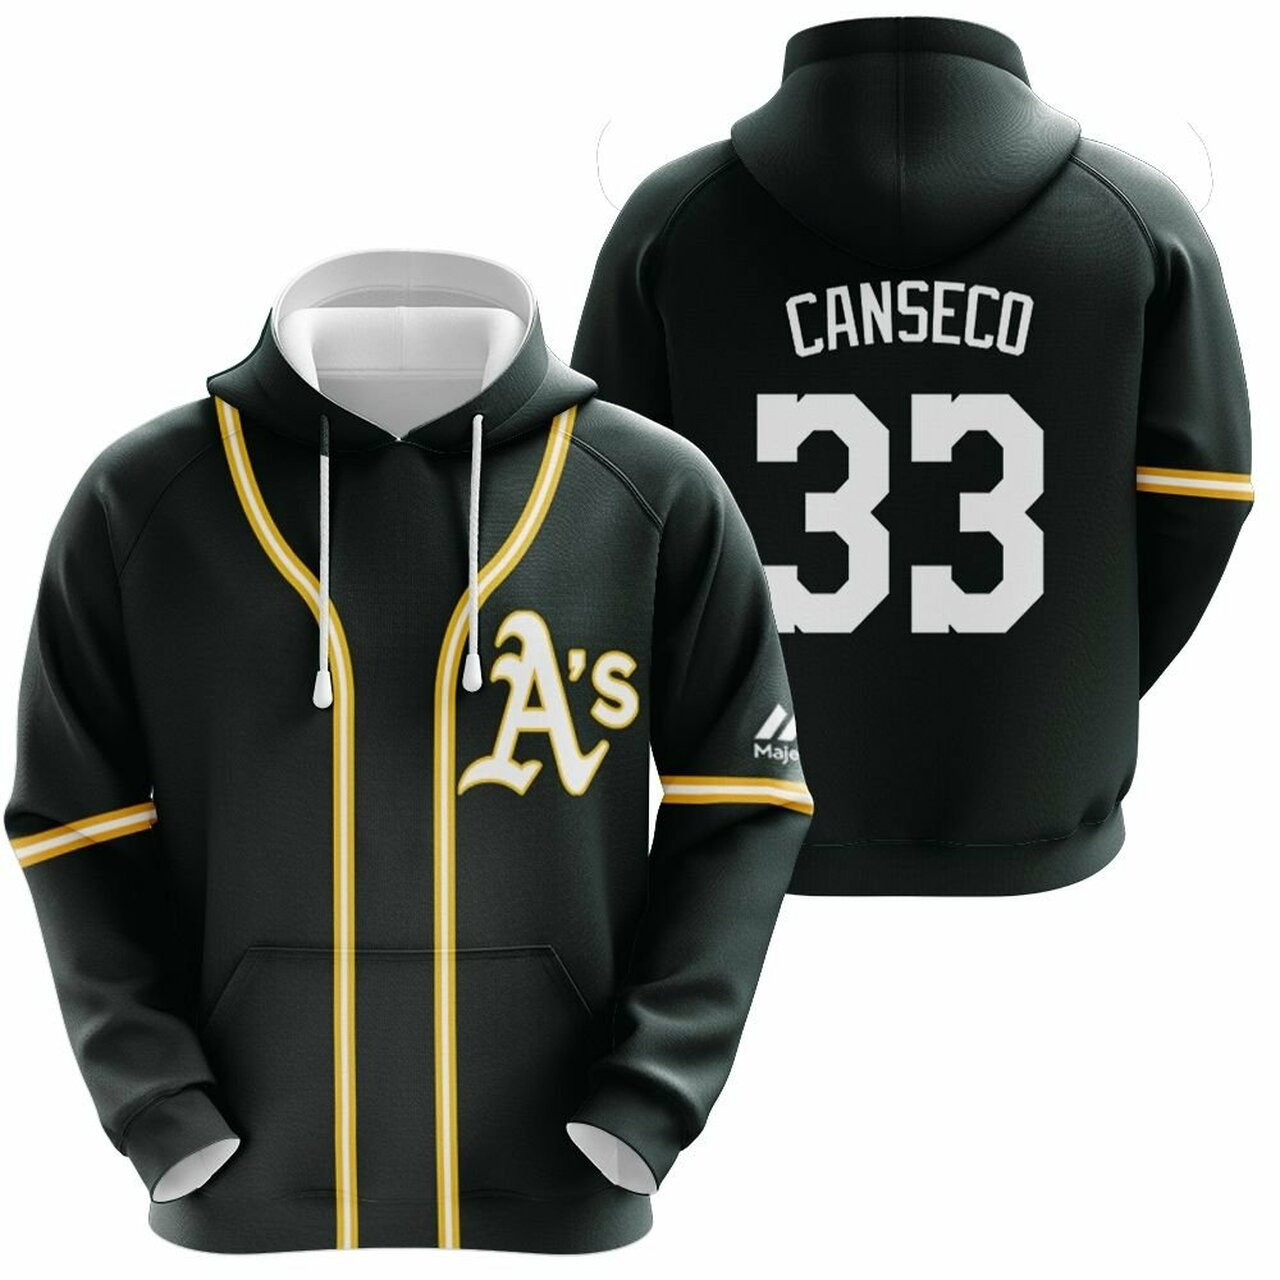 Oakland Athletics Jose Canseco 33 Mlb Baseball Majestic Black Jersey Style Gift For Athletics Fans Hoodie